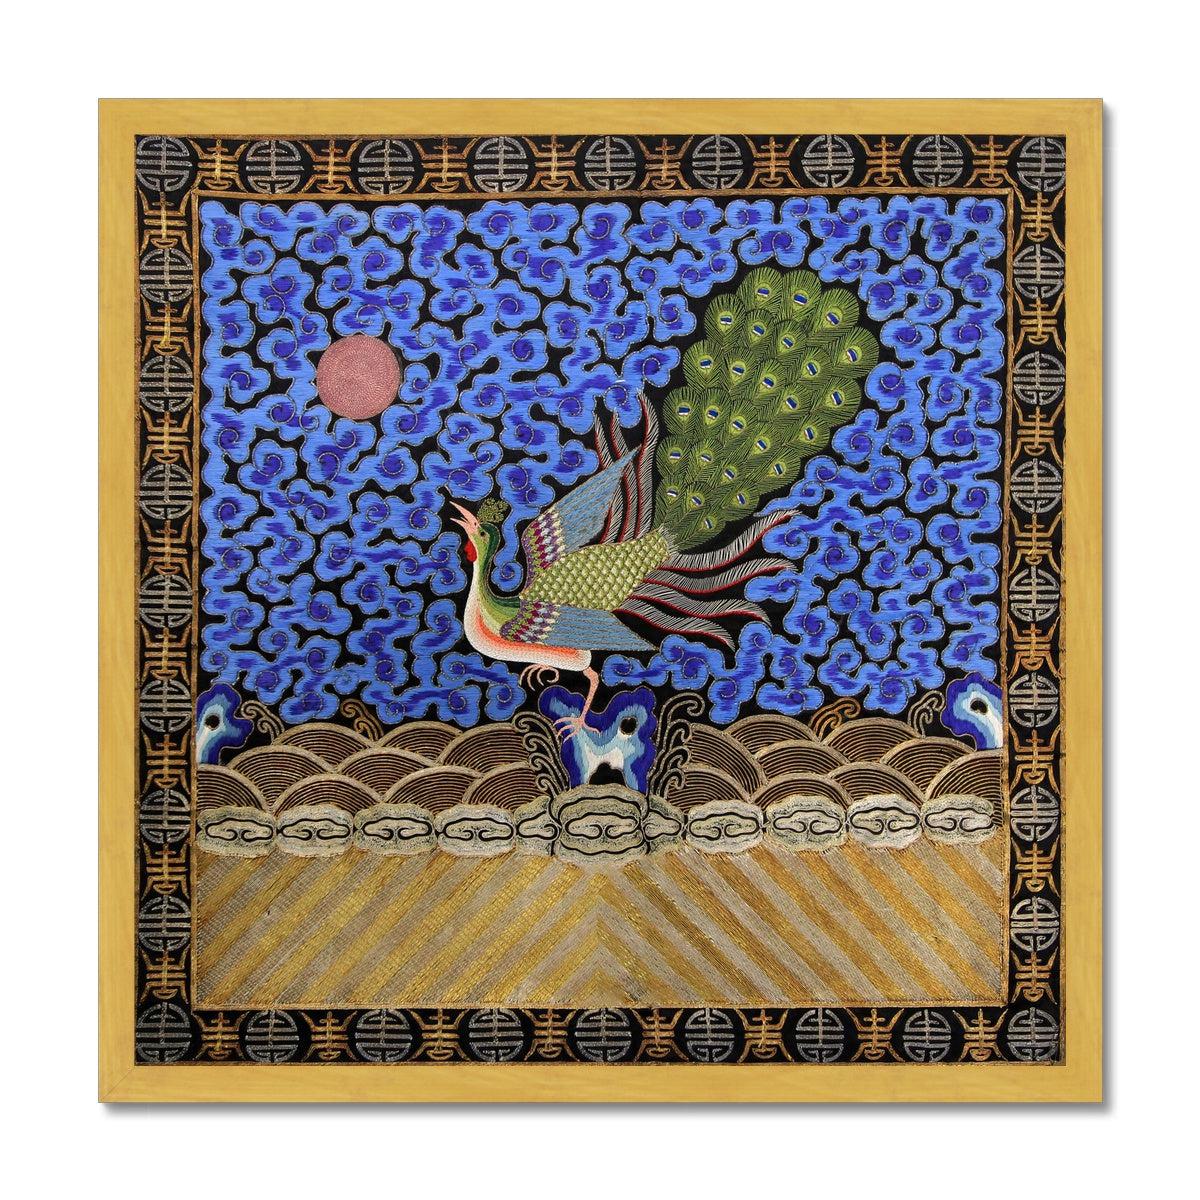 Fine art 12&quot;x12&quot; / Gold Frame Peacock Mandarin Square  | Traditional Chinese Qing Dynasty Silk Embroidery Design | Antique Framed Fine Art Print